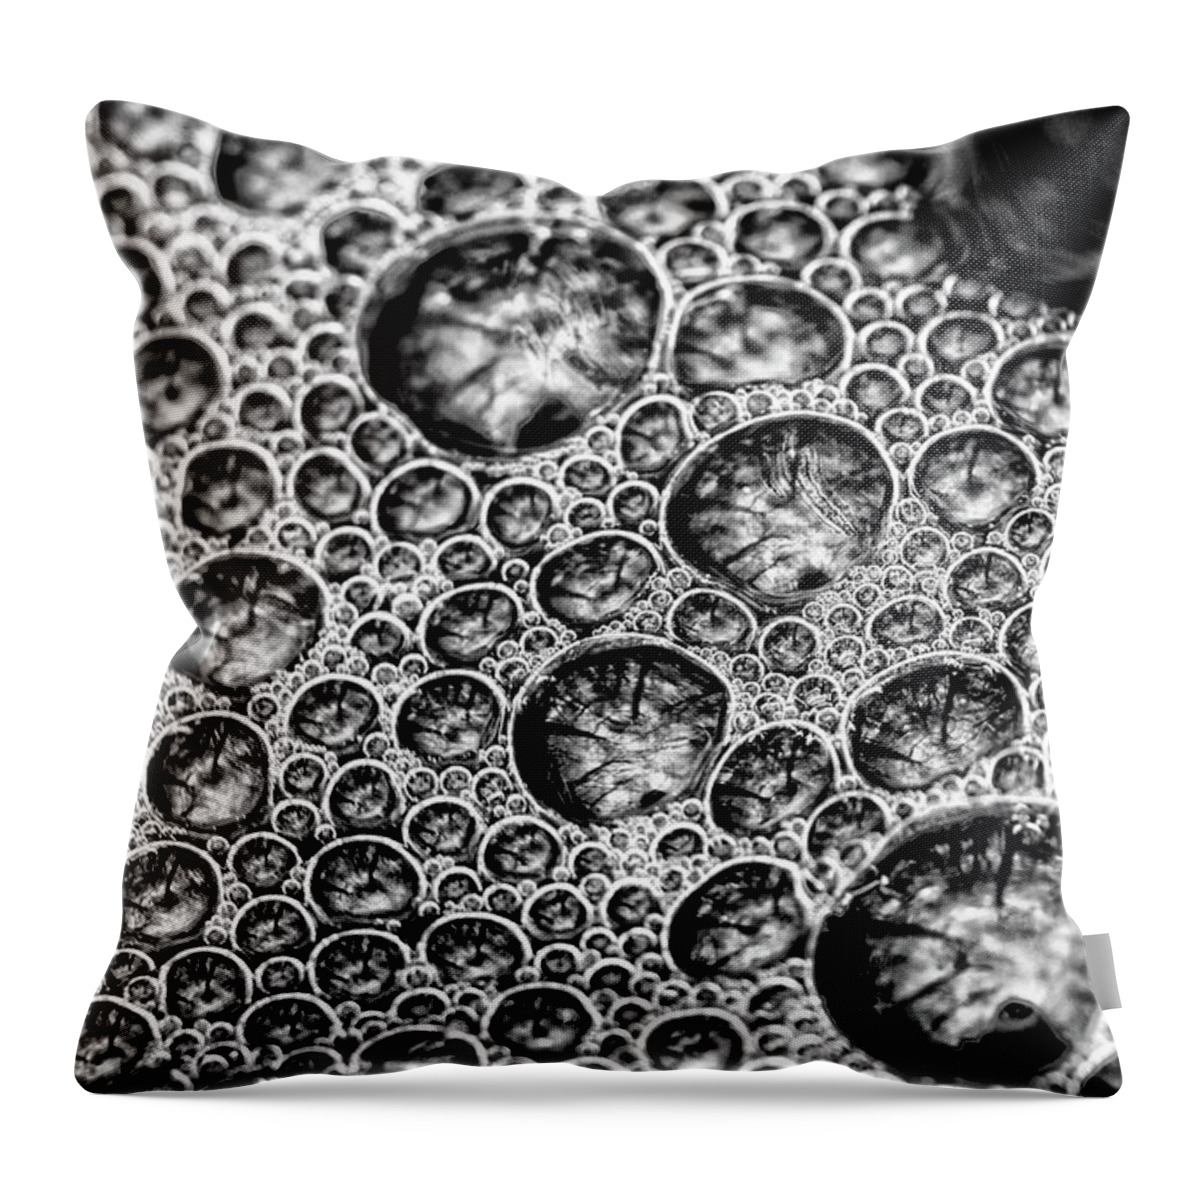 B&w Throw Pillow featuring the photograph Bubbles by Dawn J Benko